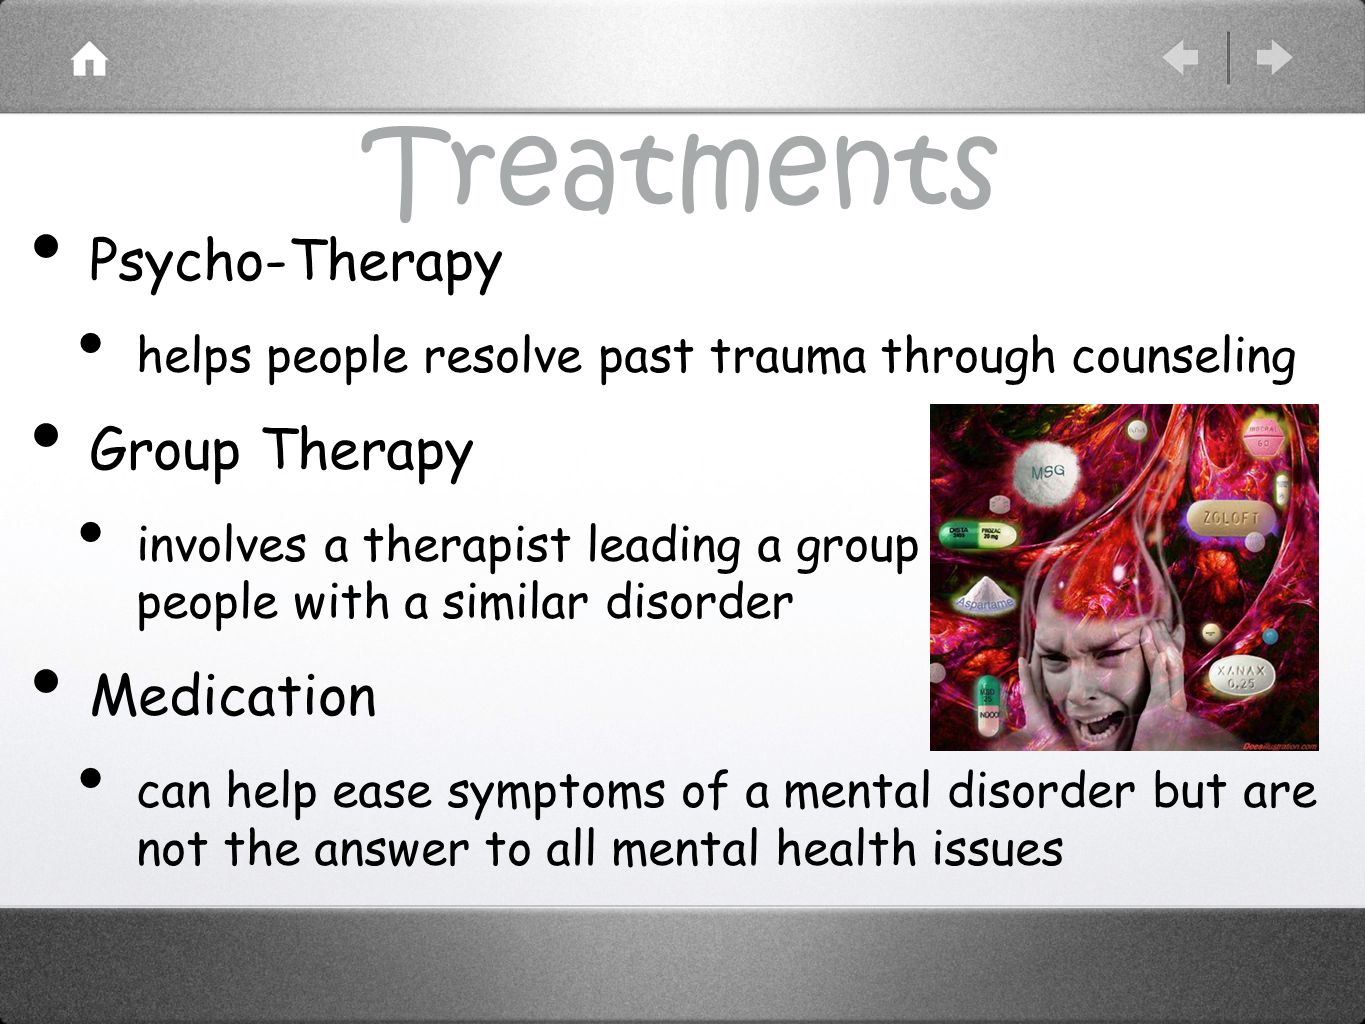 Treatments Psycho-Therapy helps people resolve past trauma through counseling Group Therapy involves a therapist leading a group of people with a similar disorder Medication can help ease symptoms of a mental disorder but are not the answer to all mental health issues